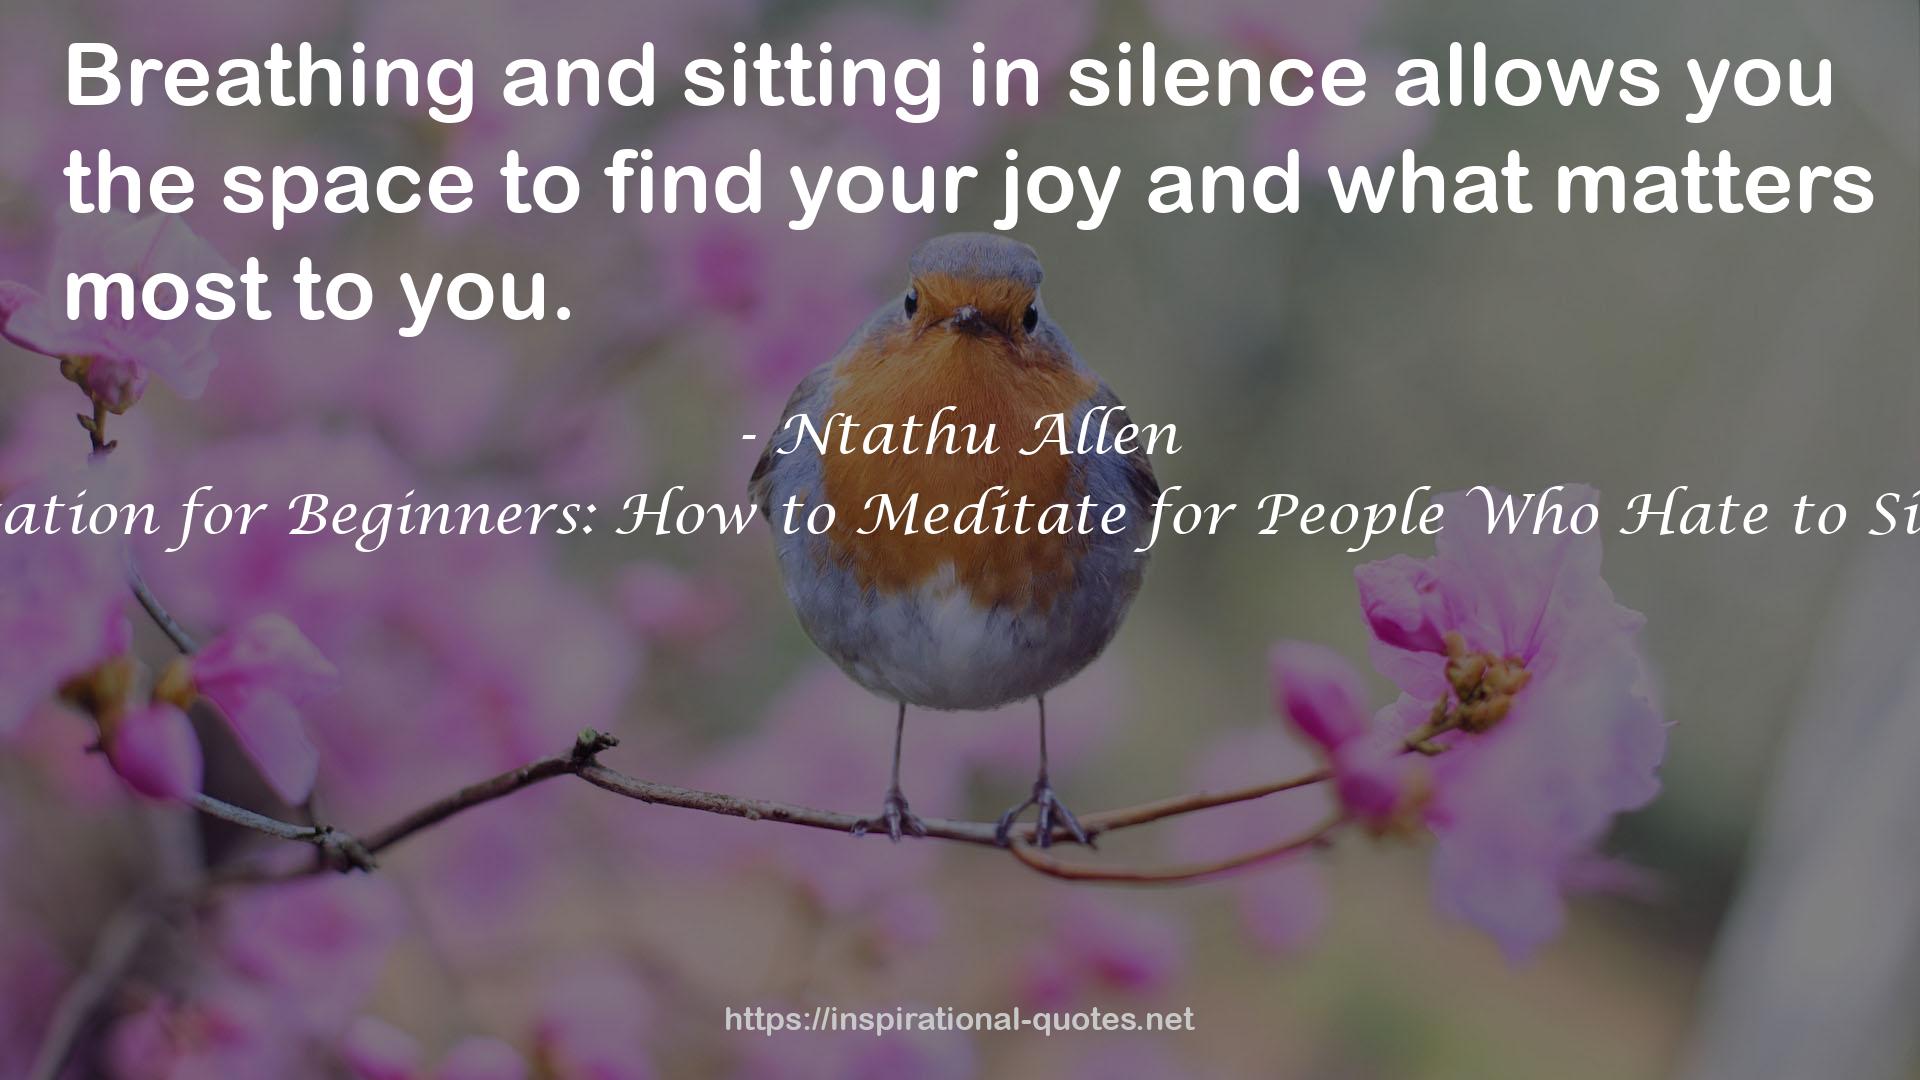 Meditation for Beginners: How to Meditate for People Who Hate to Sit Still QUOTES